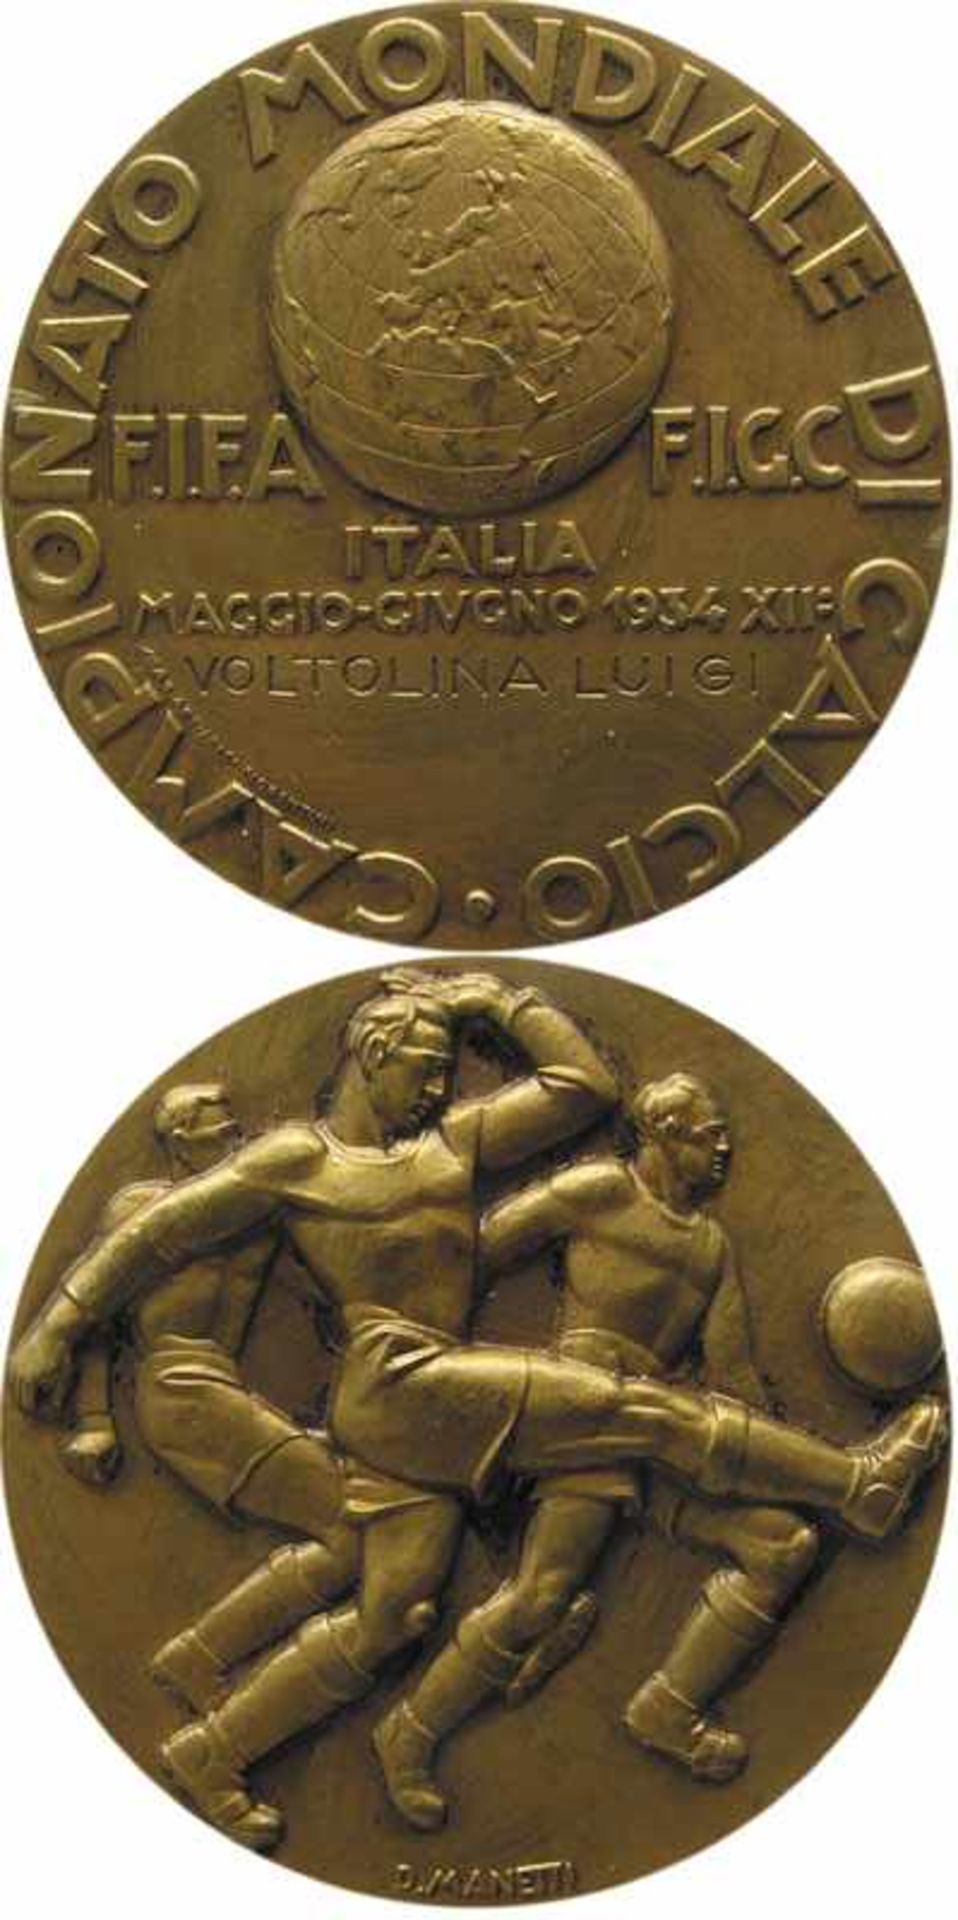 FIFA World Cup 1934. Participation Medal - Official participation medal for the Football World Cup